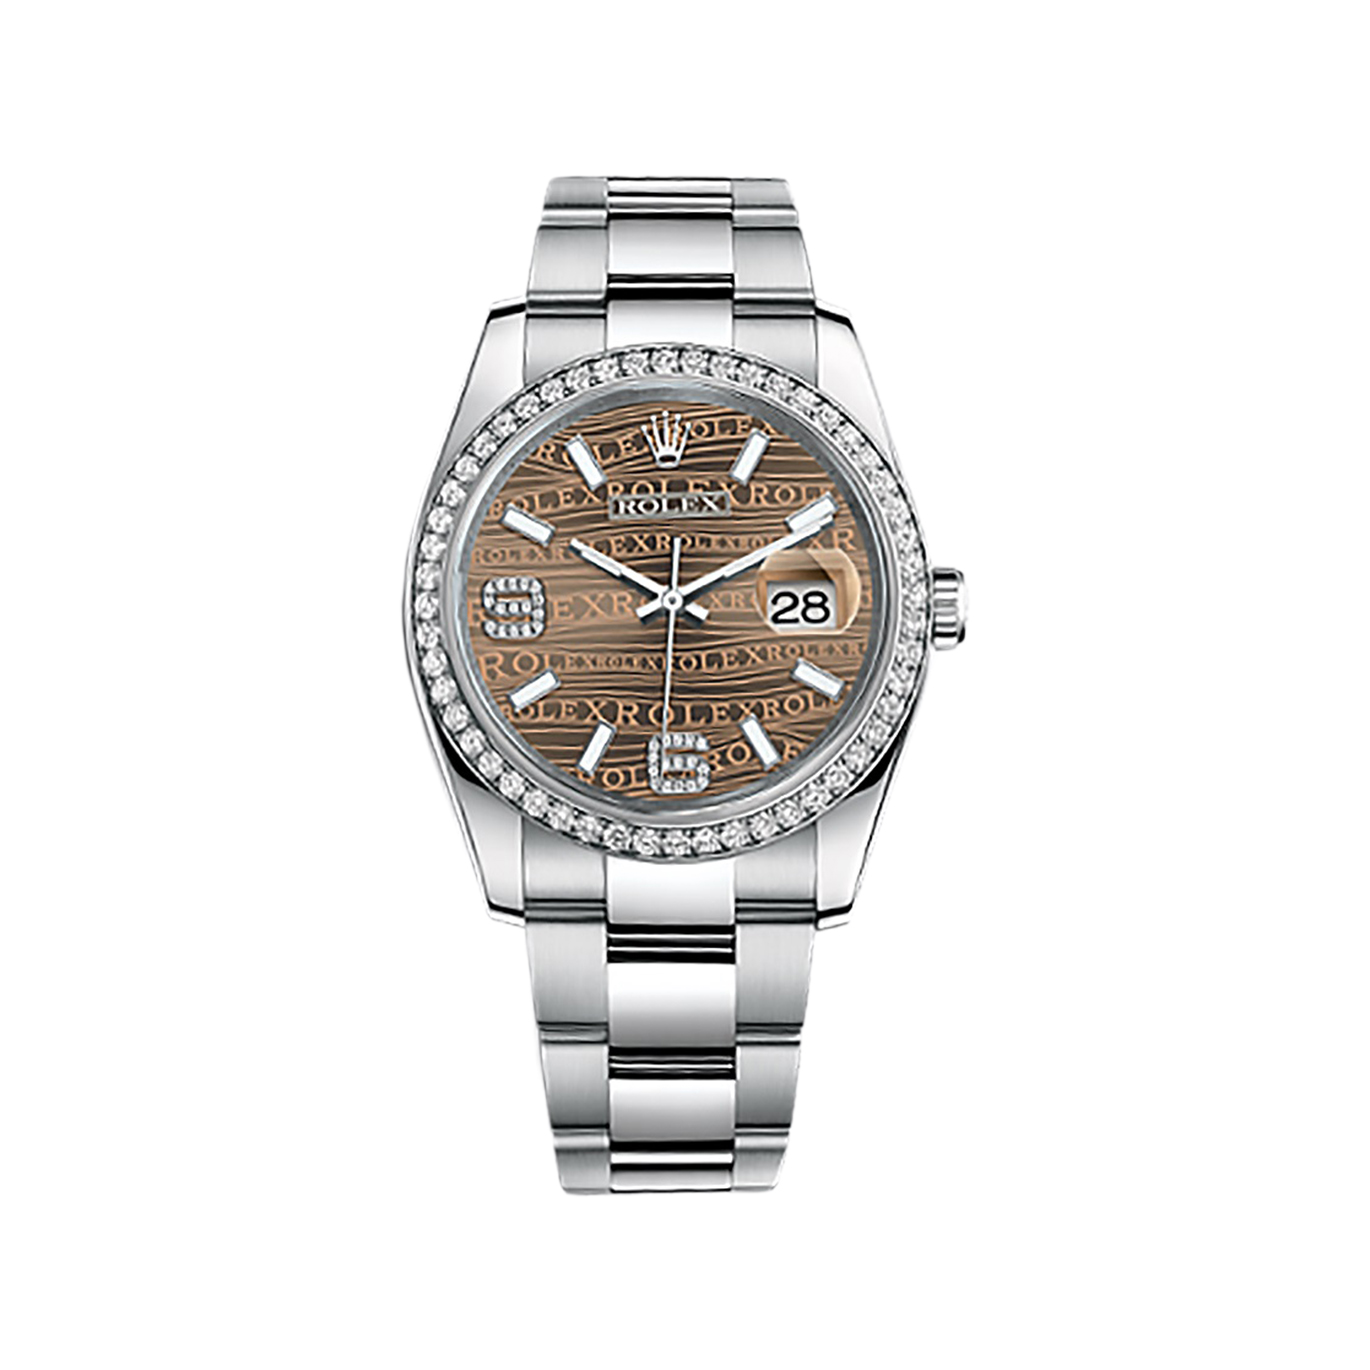 Datejust 36 116244 White Gold & Stainless Steel Watch (Bronze Waves Set with Diamonds)